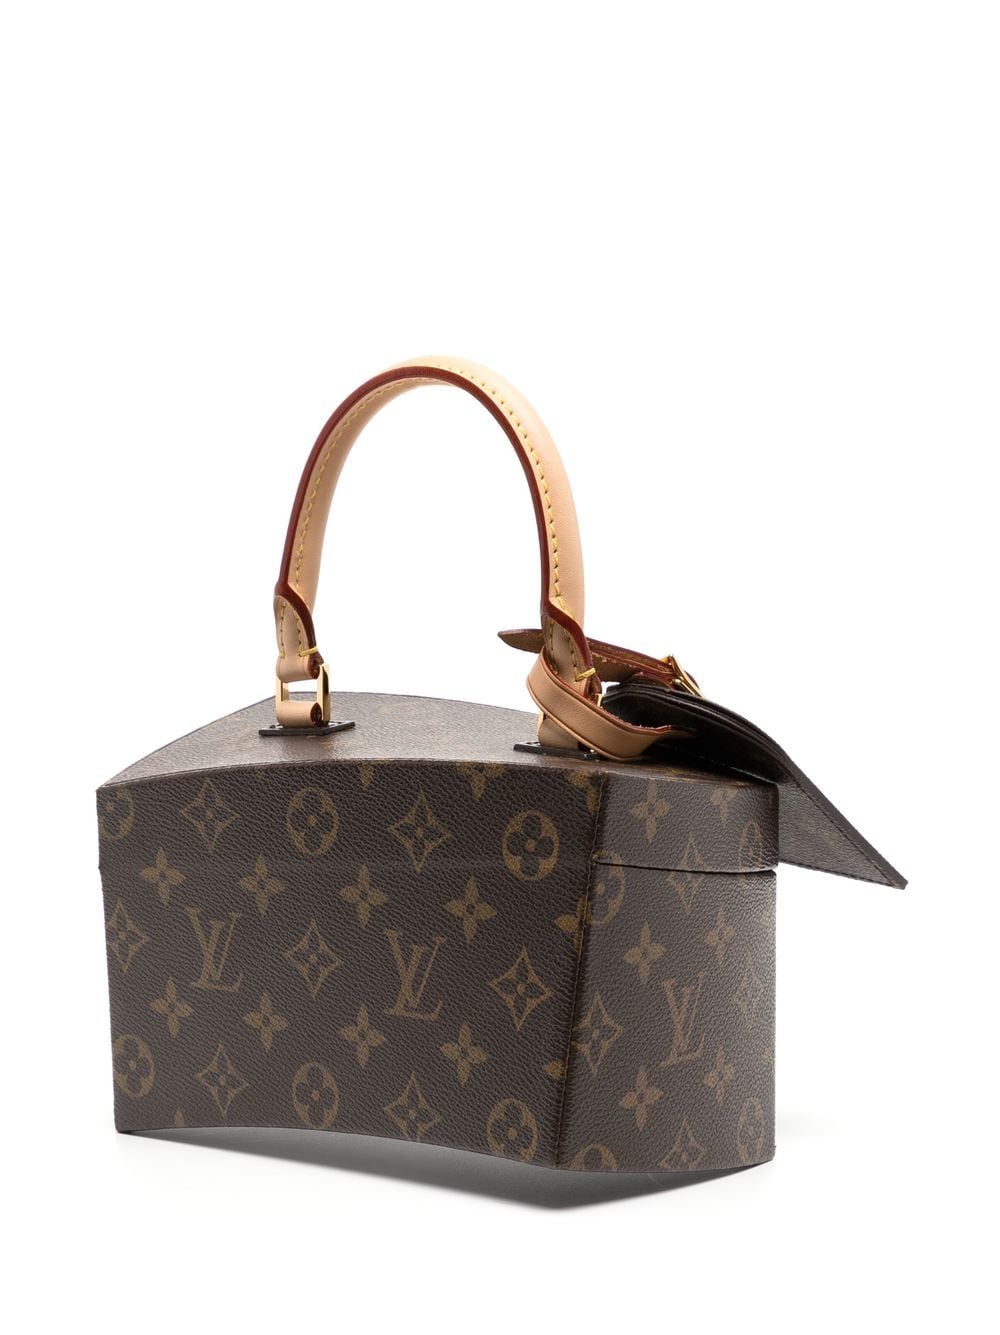 LOUIS VUITTON. A FRANK GEHRY ICONOCLAST TWISTED BOX